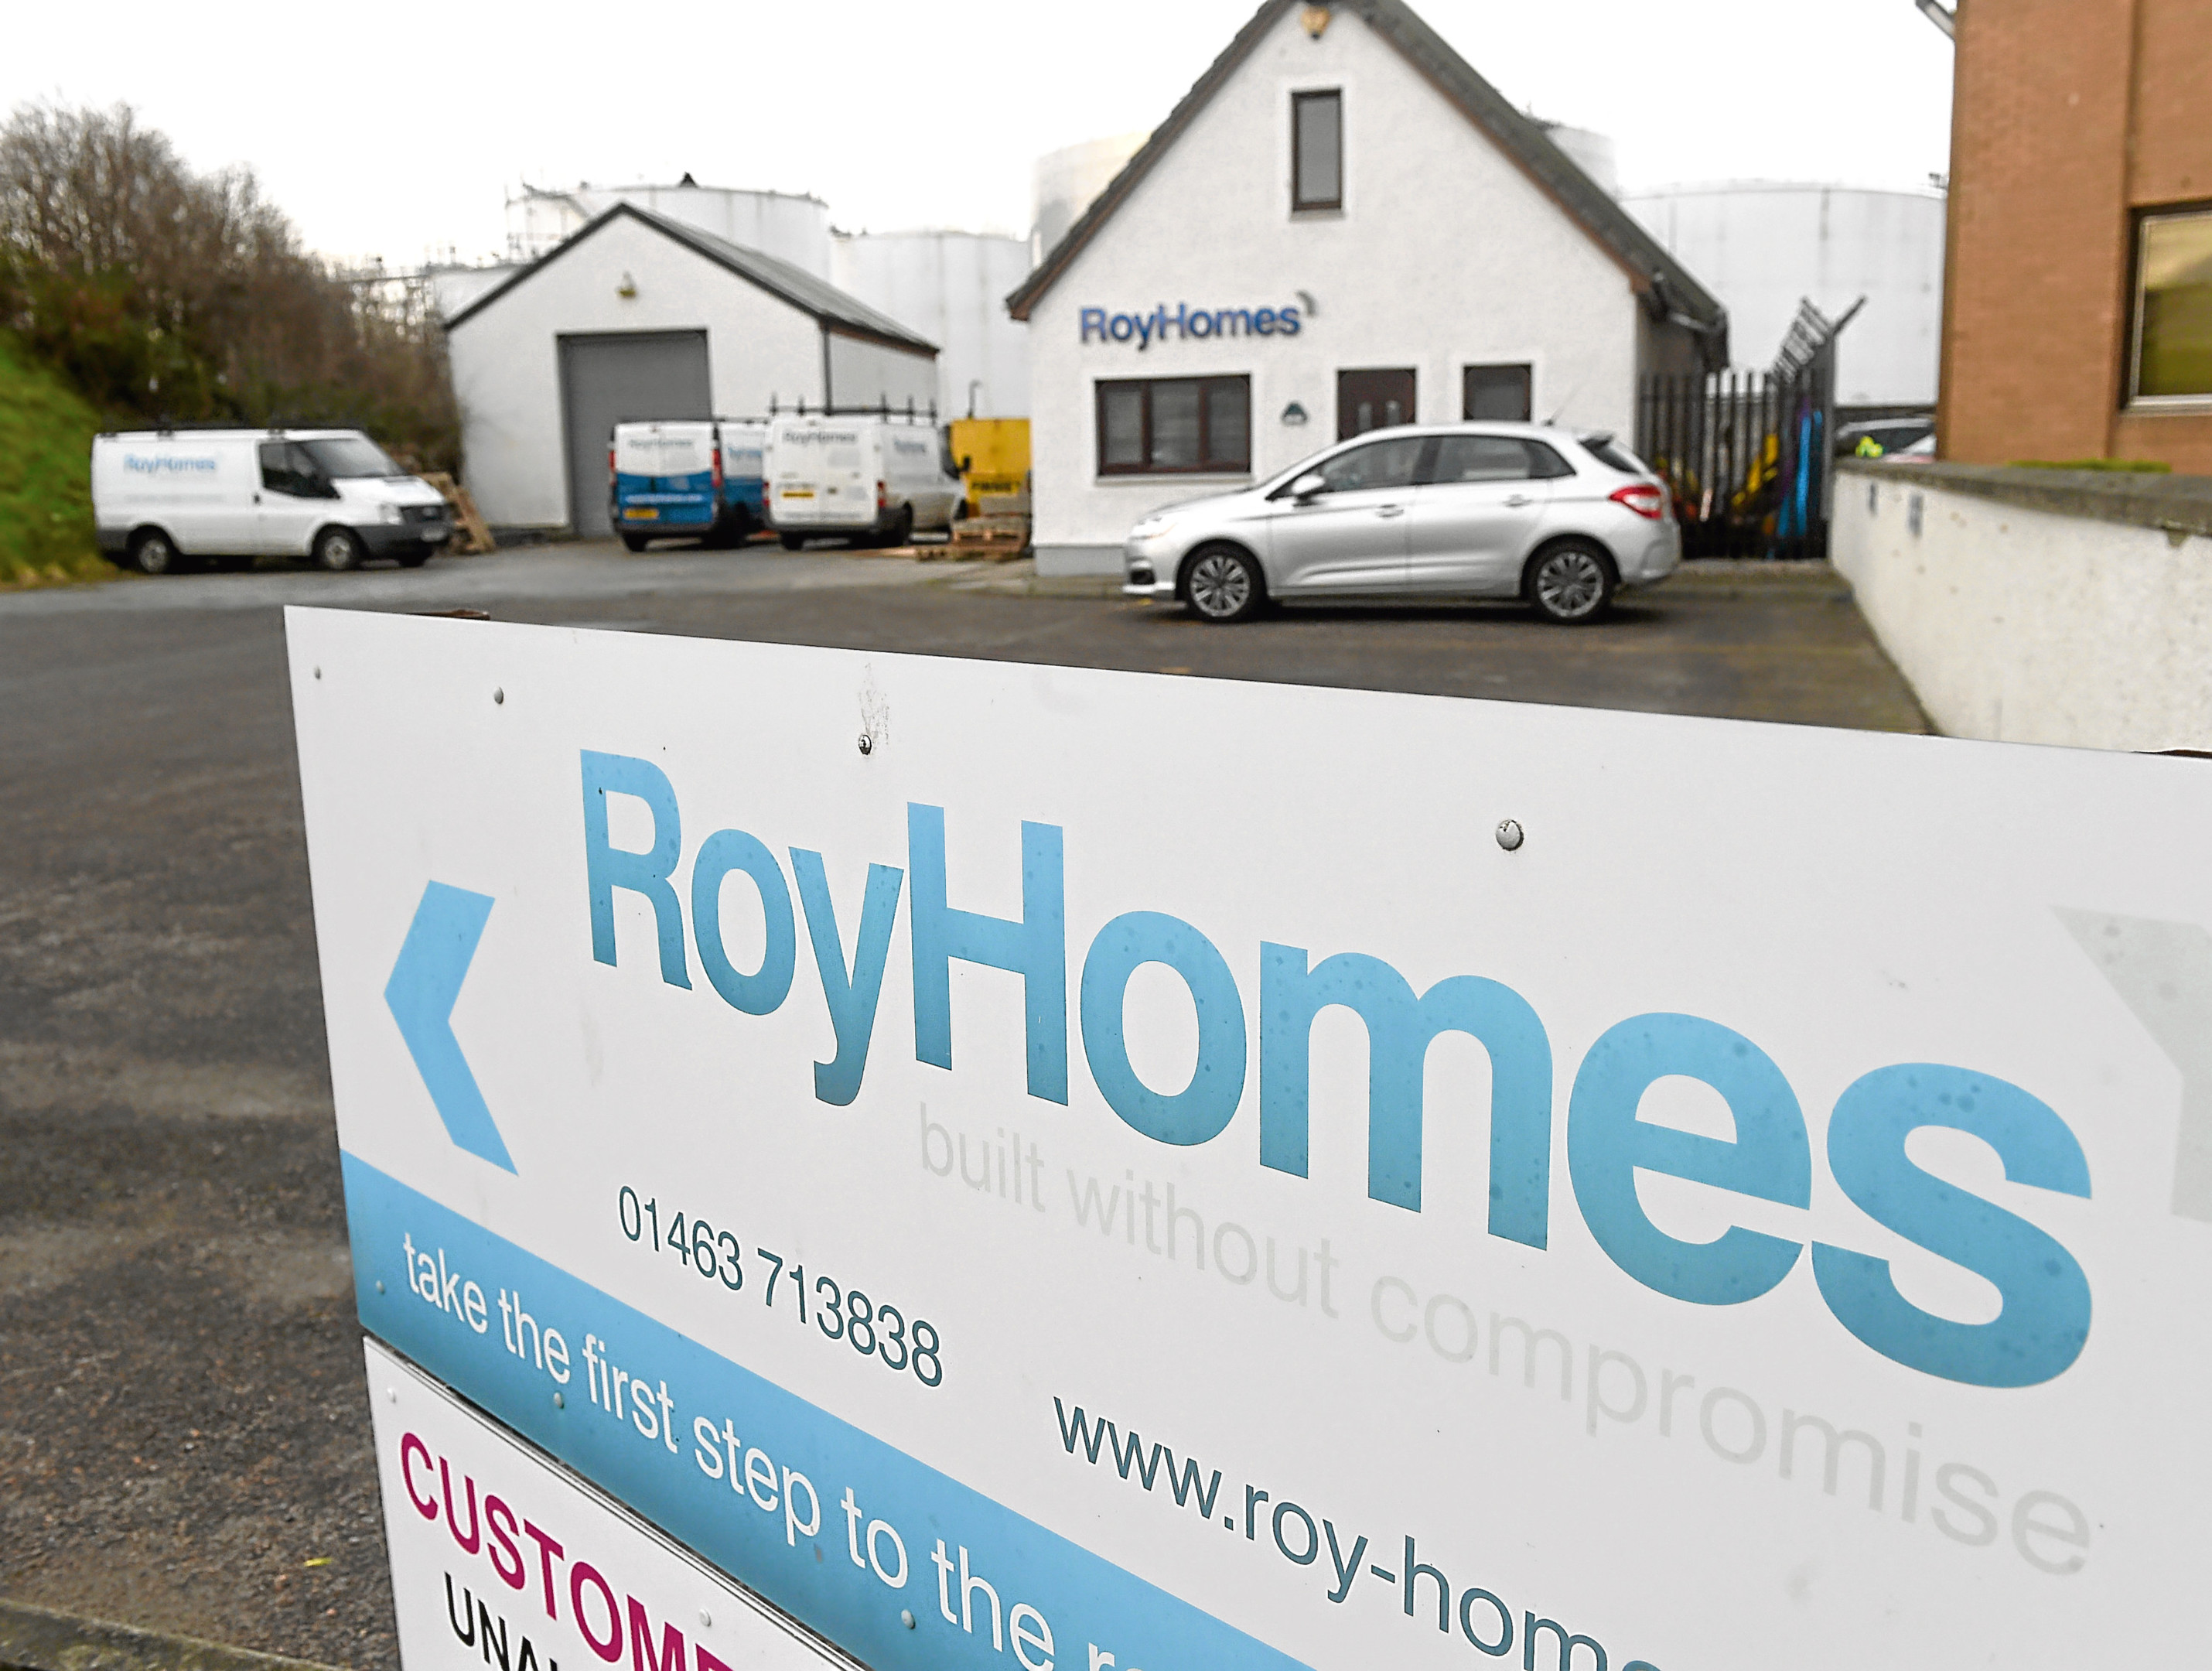 Picture by SANDY McCOOK   24th January '17

The Roy Homes offices in Inverness yesterday as the company enter administration.